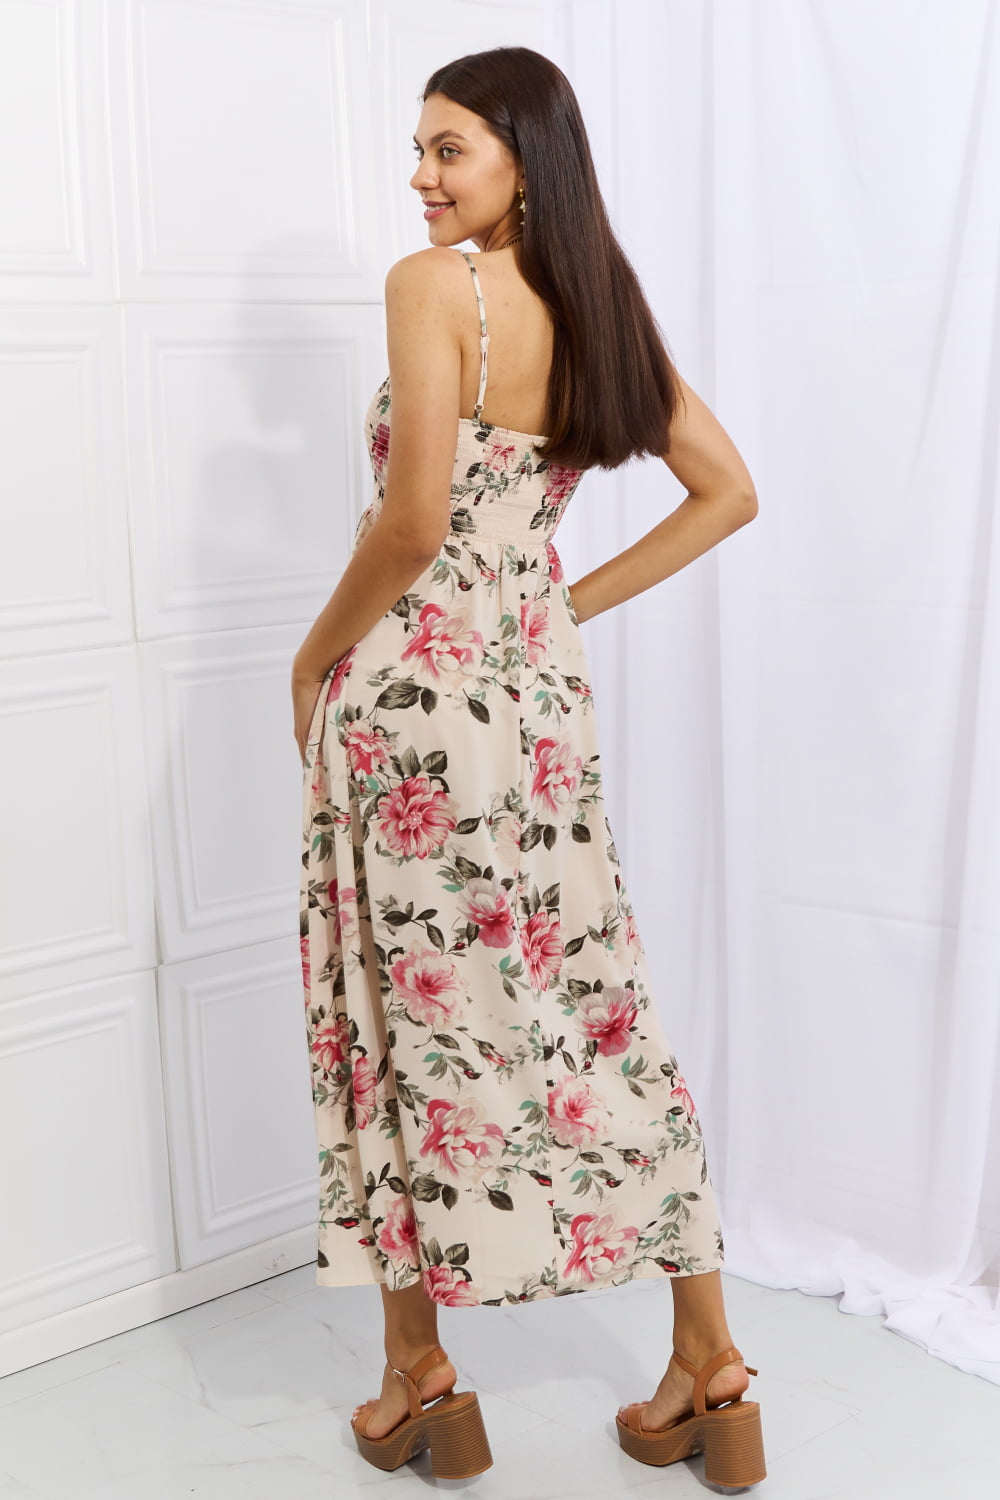 Hold Me Tight Floral Maxi Dress